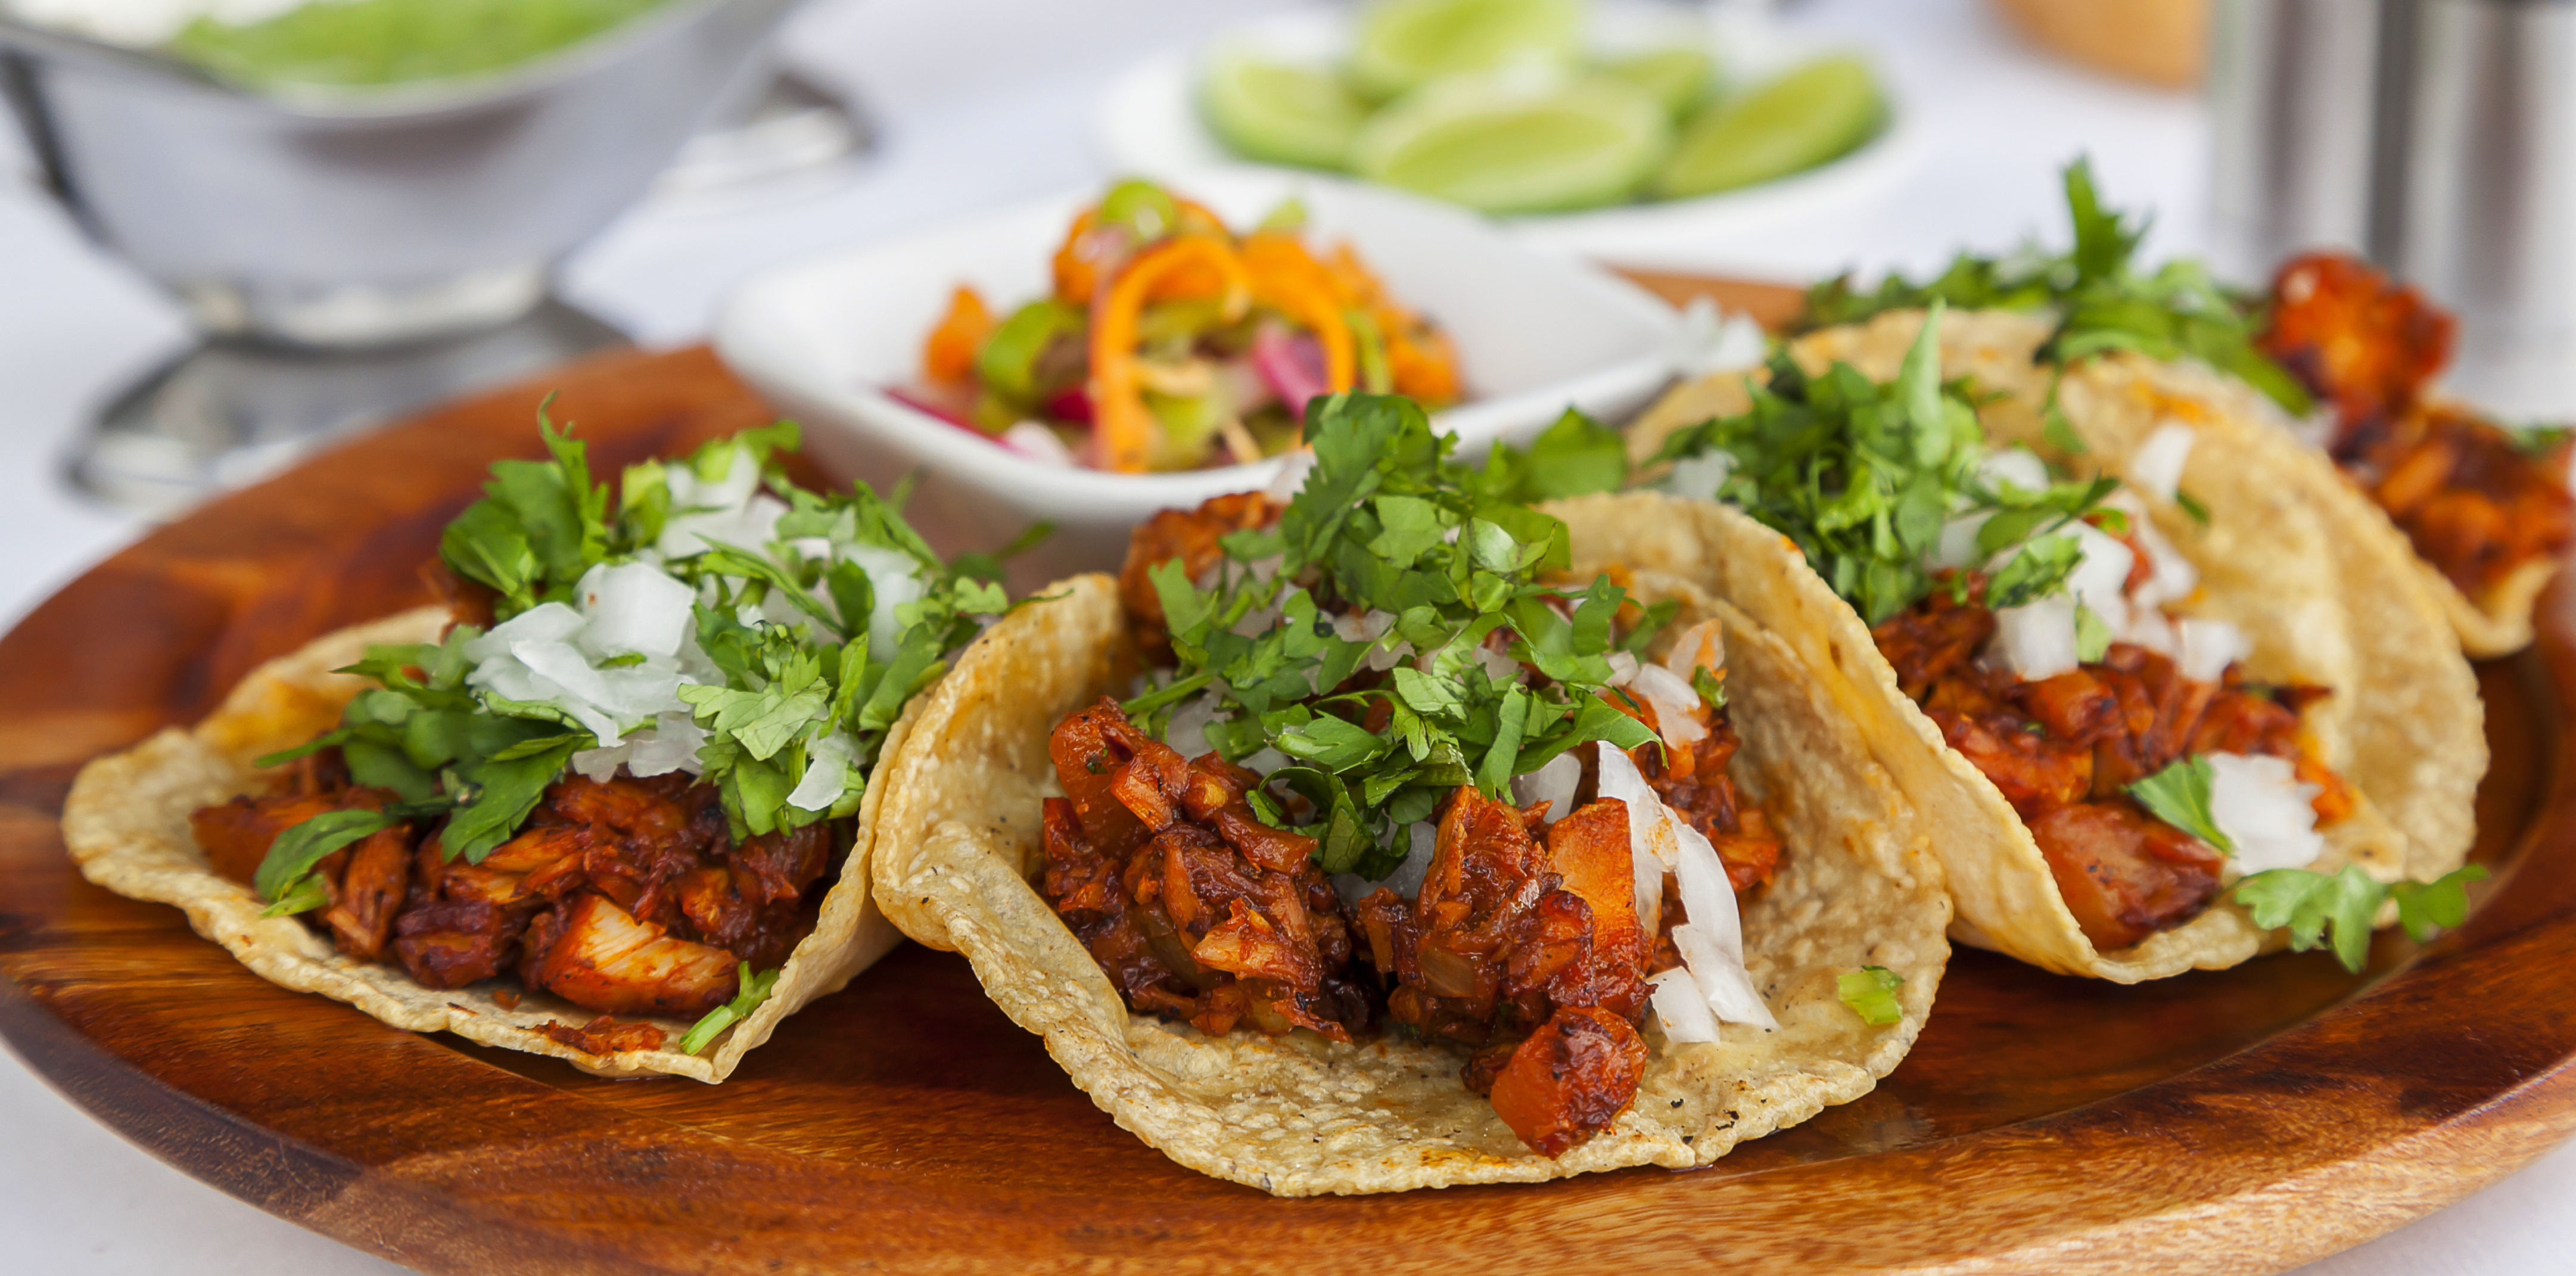 100 Most Popular Mexican Dishes - TasteAtlas